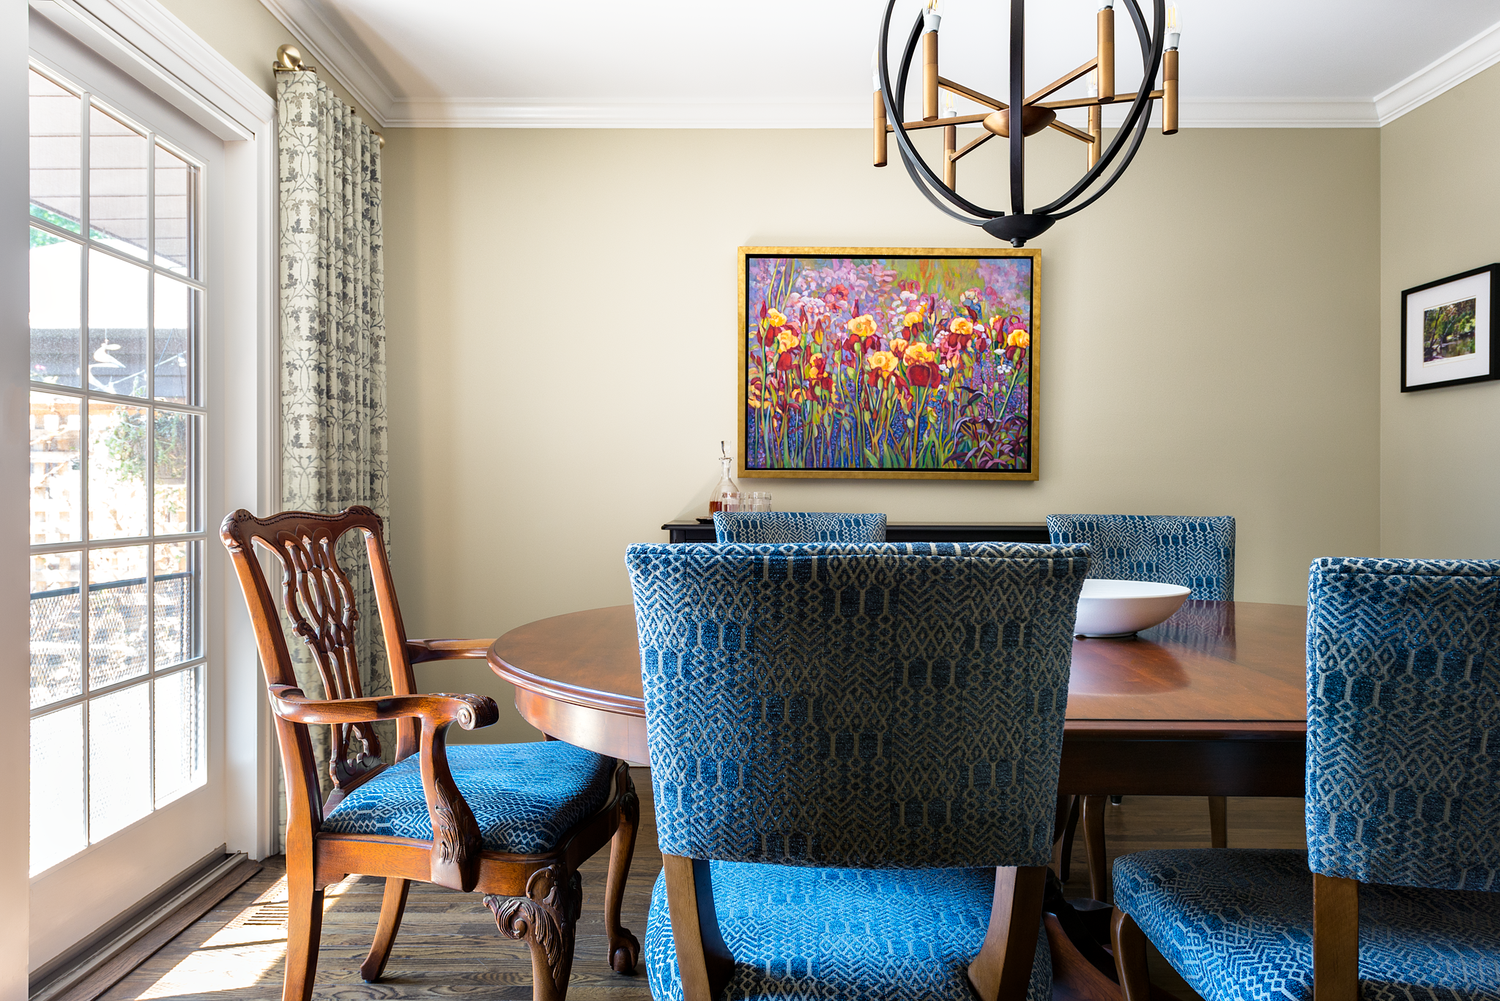 chippendale chair in formal dining room with artwork